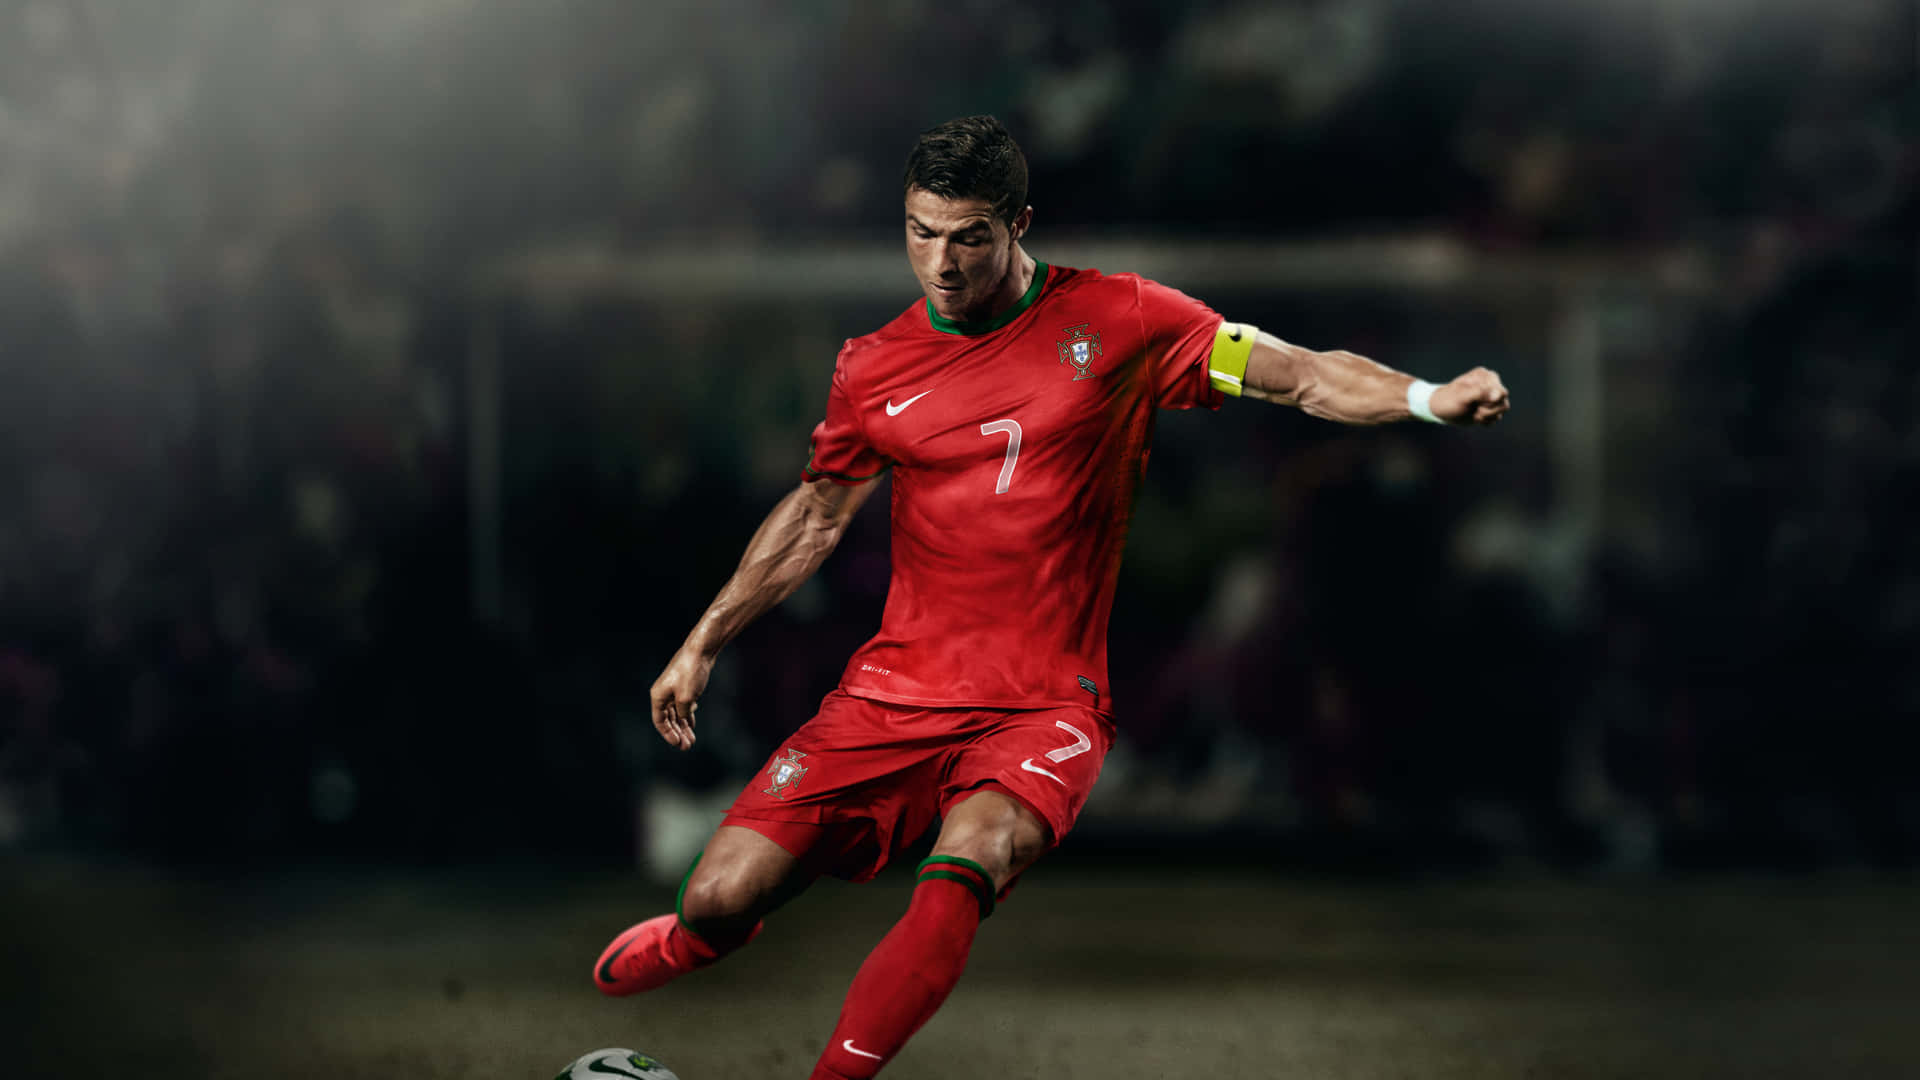 Cristiano Ronaldo scoring a goal while competing in the world's most beloved sport. Wallpaper